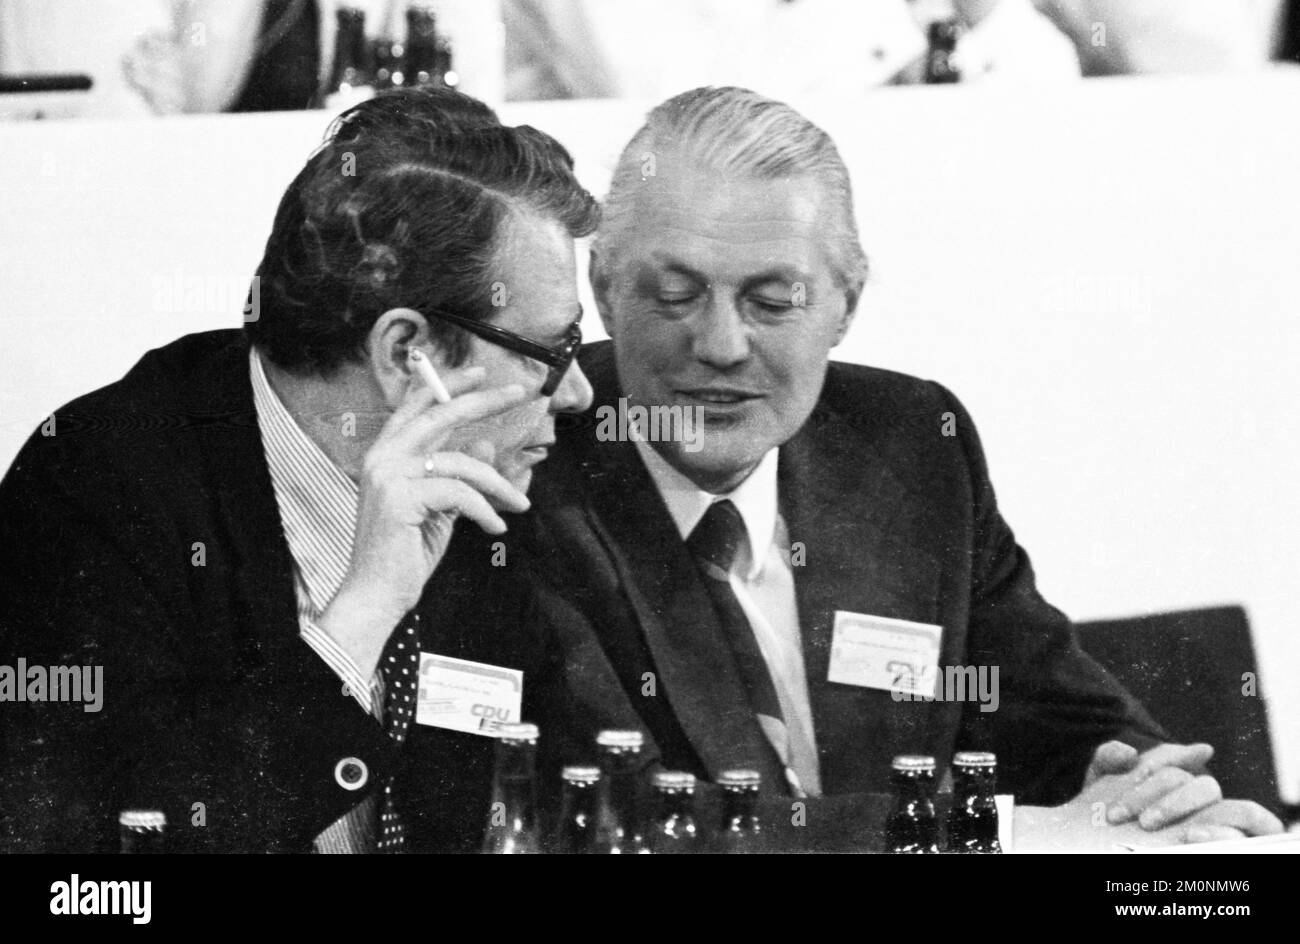 The Party Congress of the Christian Democratic Union (CDU) on 24.5.1976 in Hanover, Heinrich Köppler, Gehard Stoltenberg f.l, Germany, Europe Stock Photo